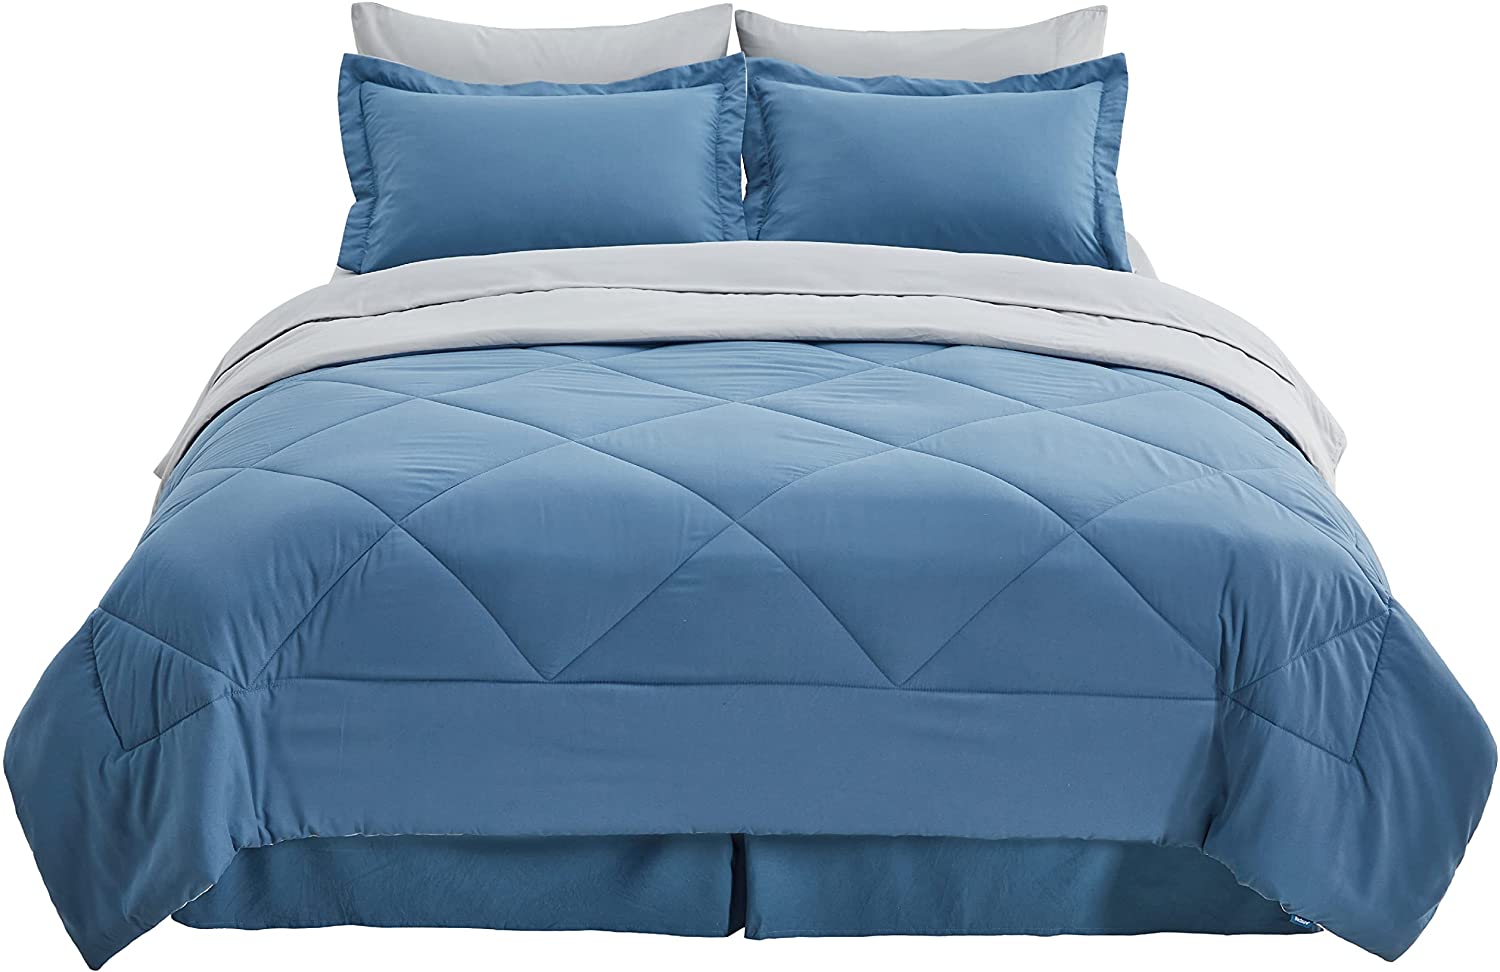 Bedsure Blue Comforter Set - 8 Pieces Reversible ( Blue for all size) $21.59~$30.39 + Free Shipping with Prime